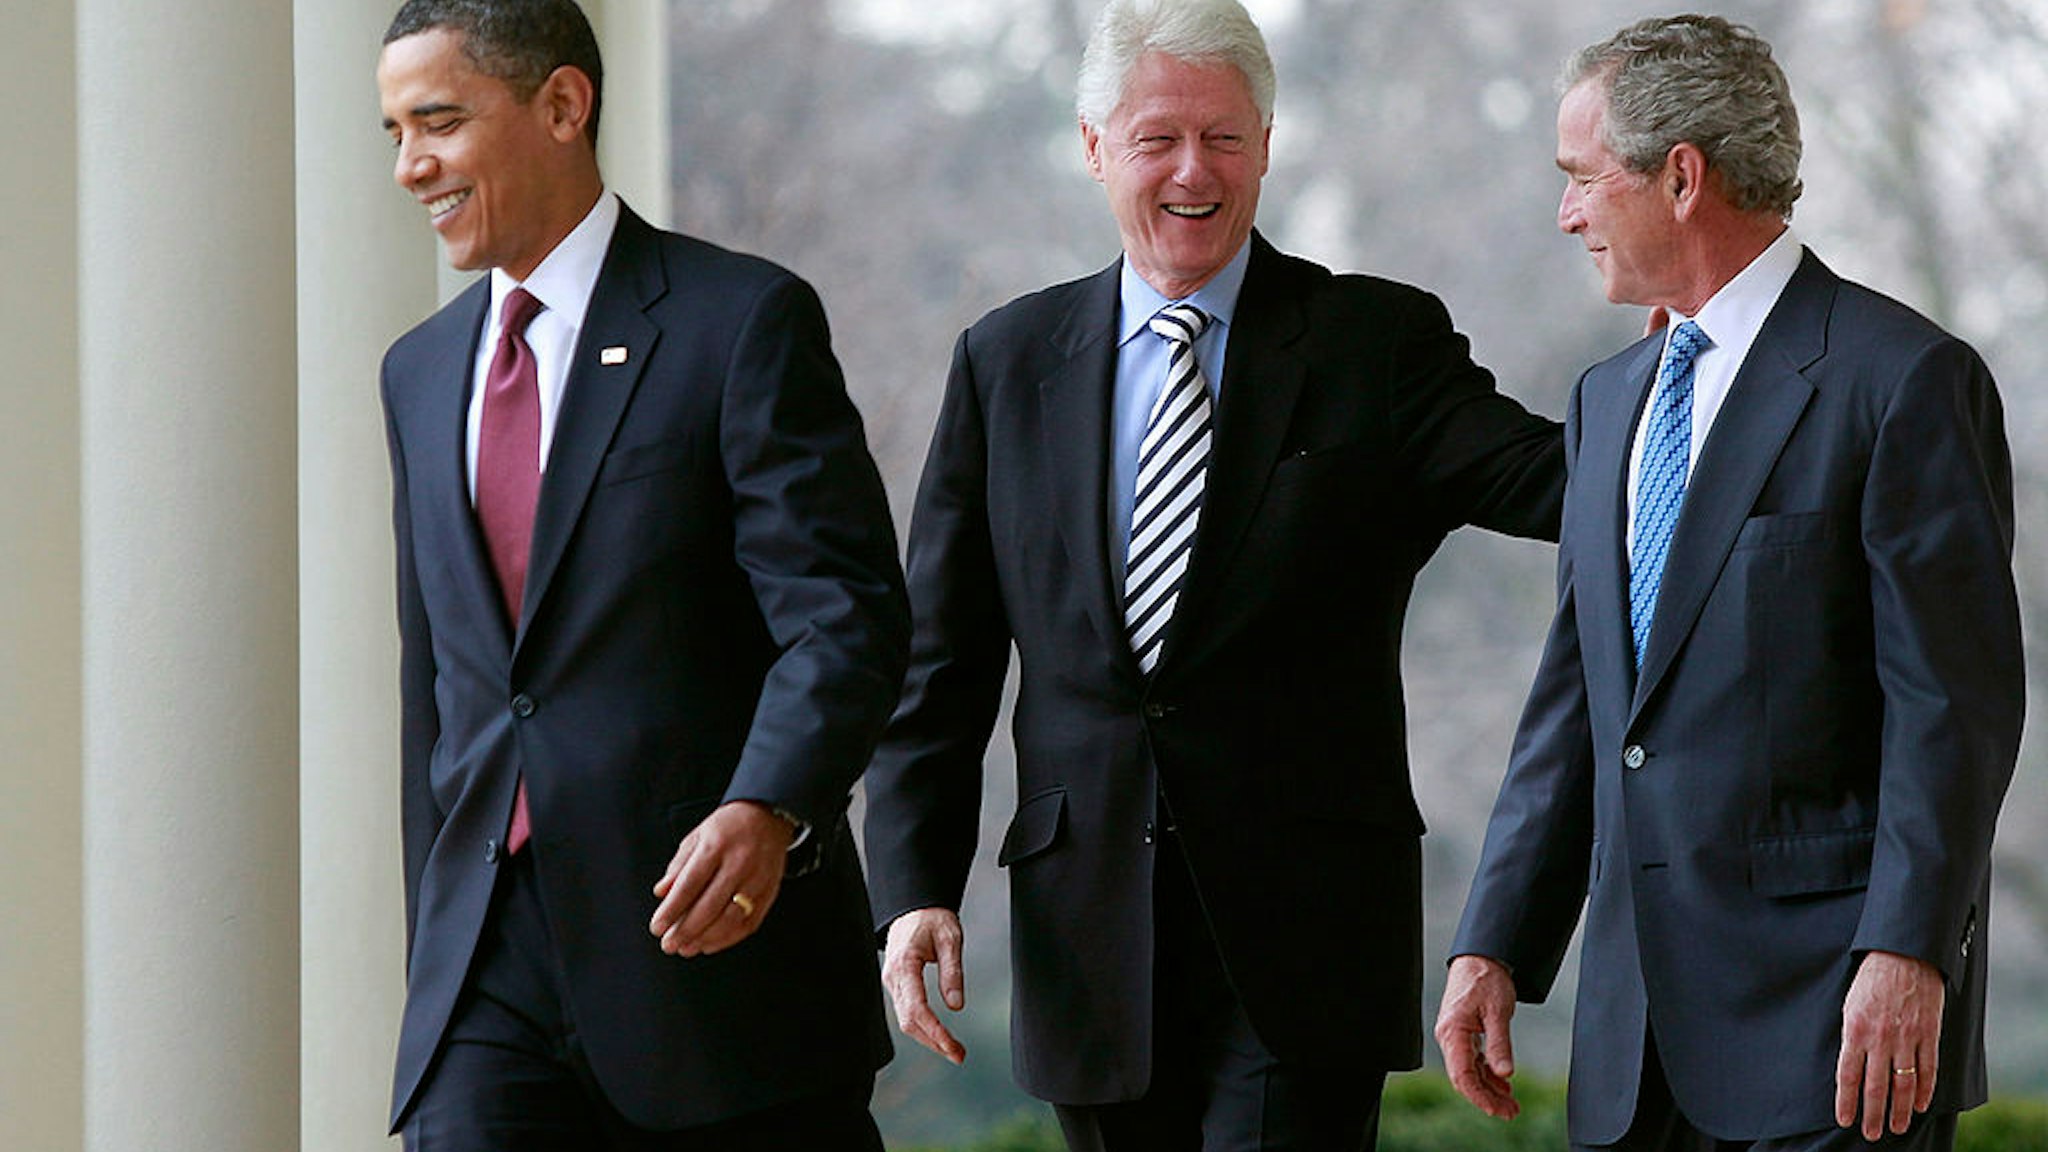 Obama, With Former Presidents Bush And Clinton, Speaks On Haiti